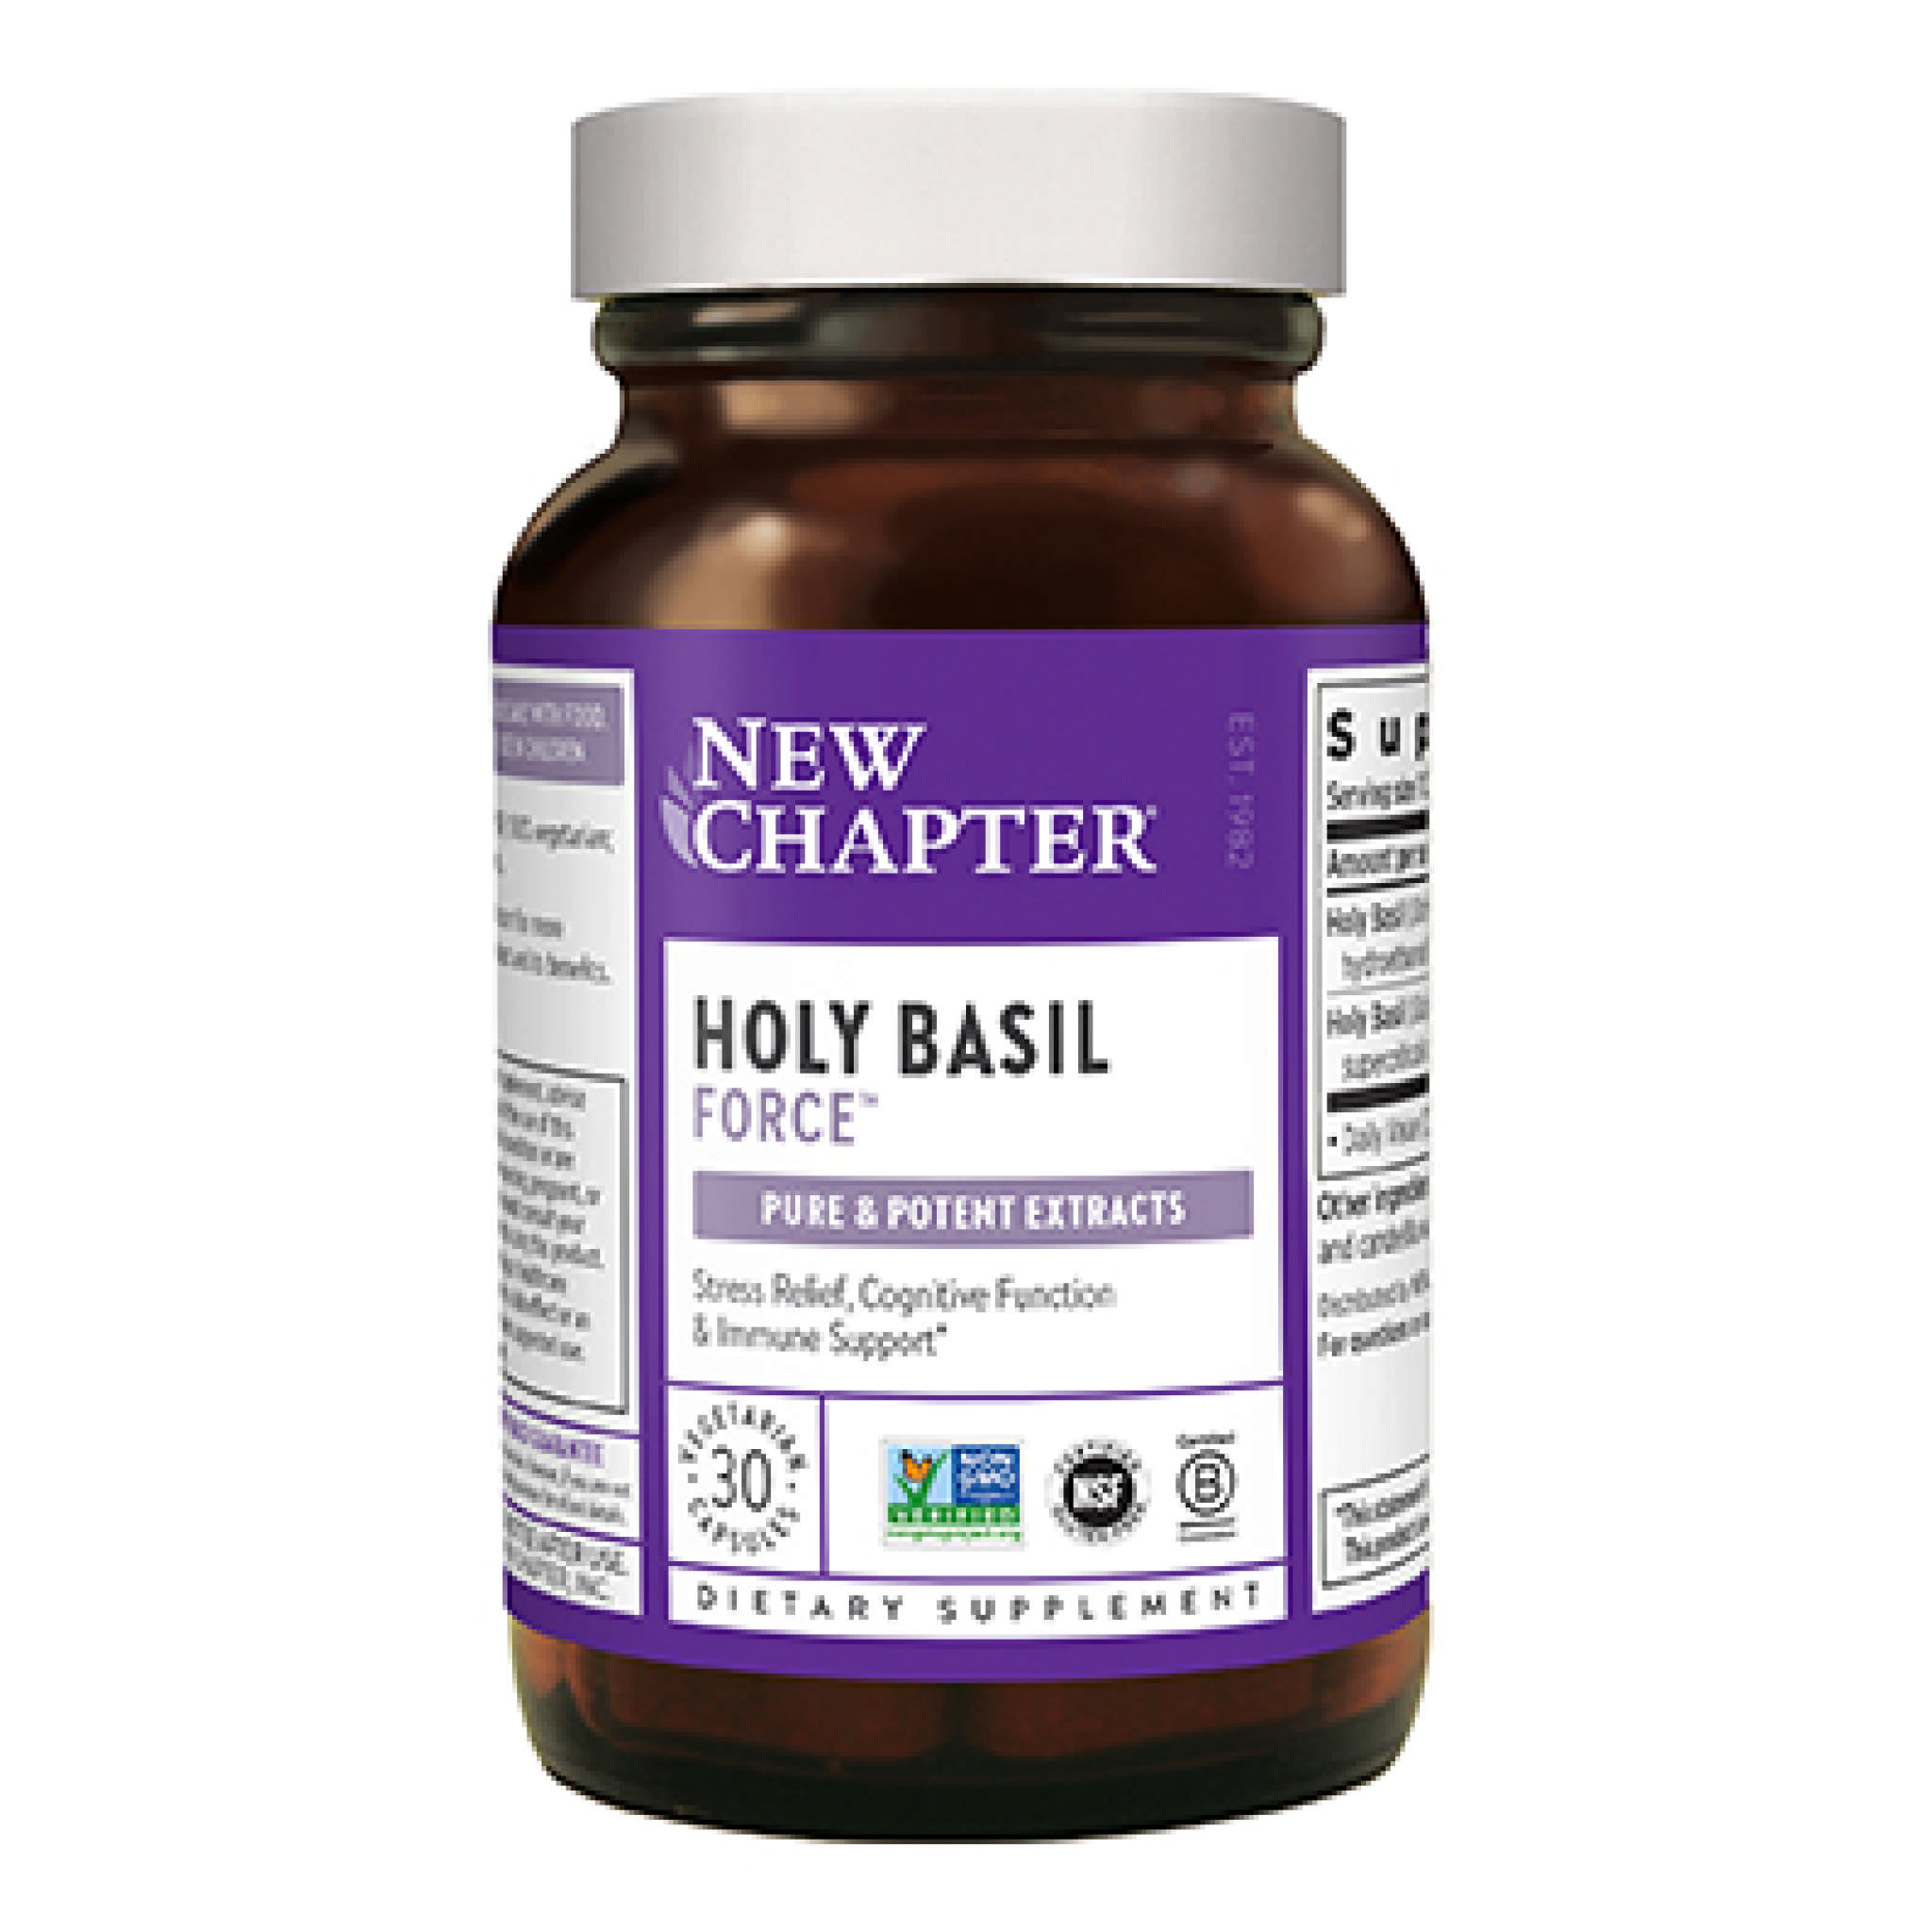 New Chapter - Holy Basil Force vCap